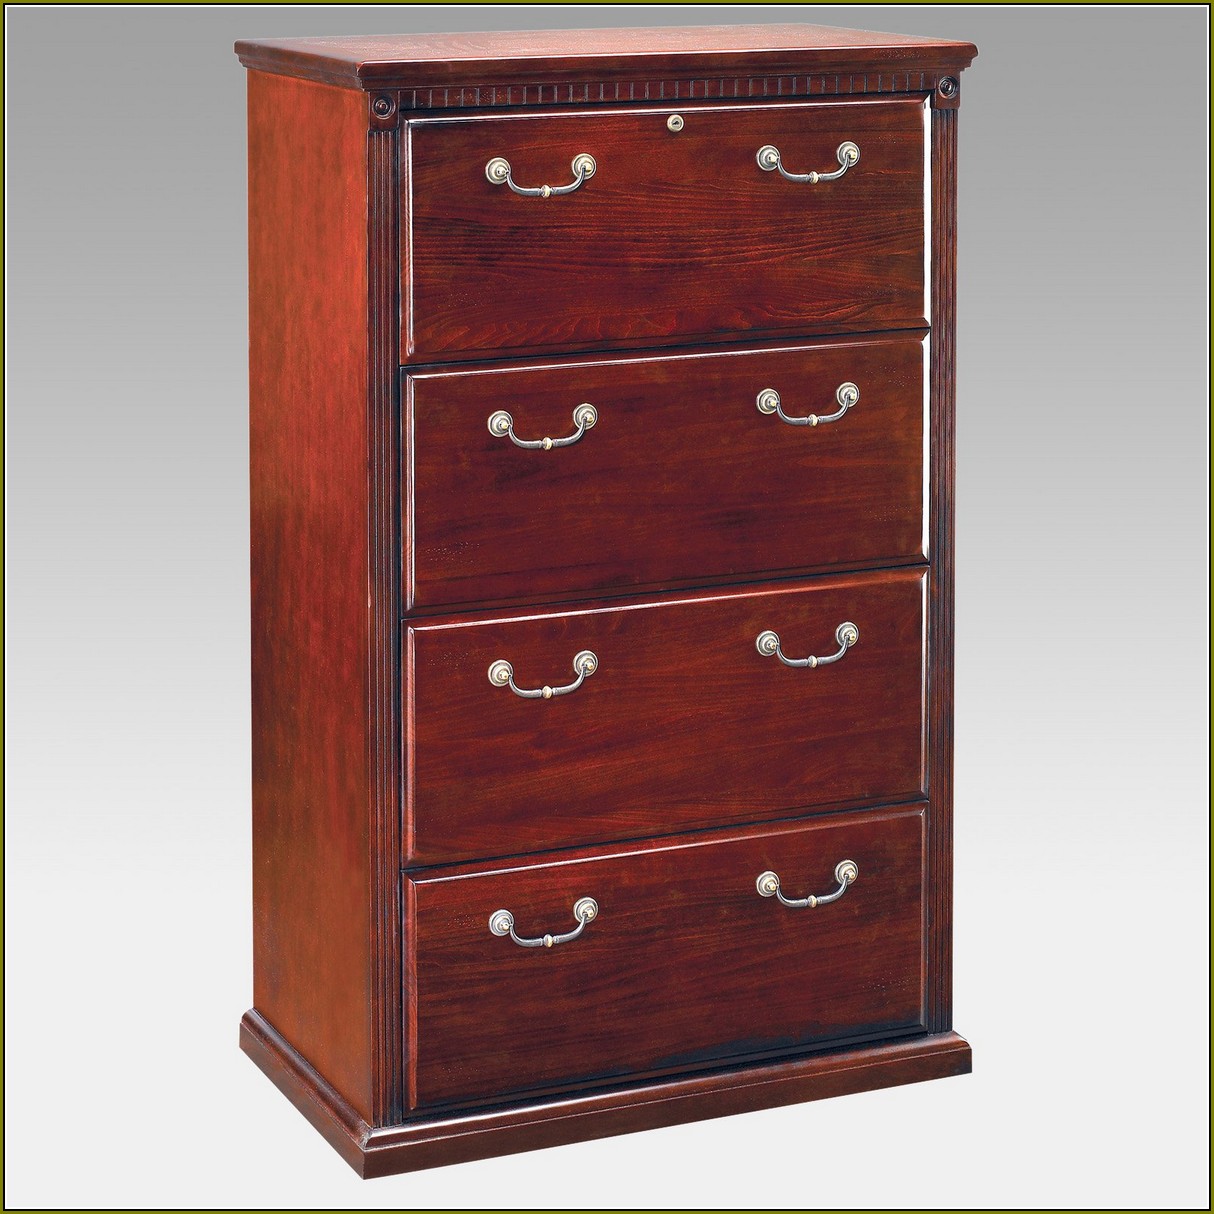 4 Drawer Wood File Cabinet With Lock